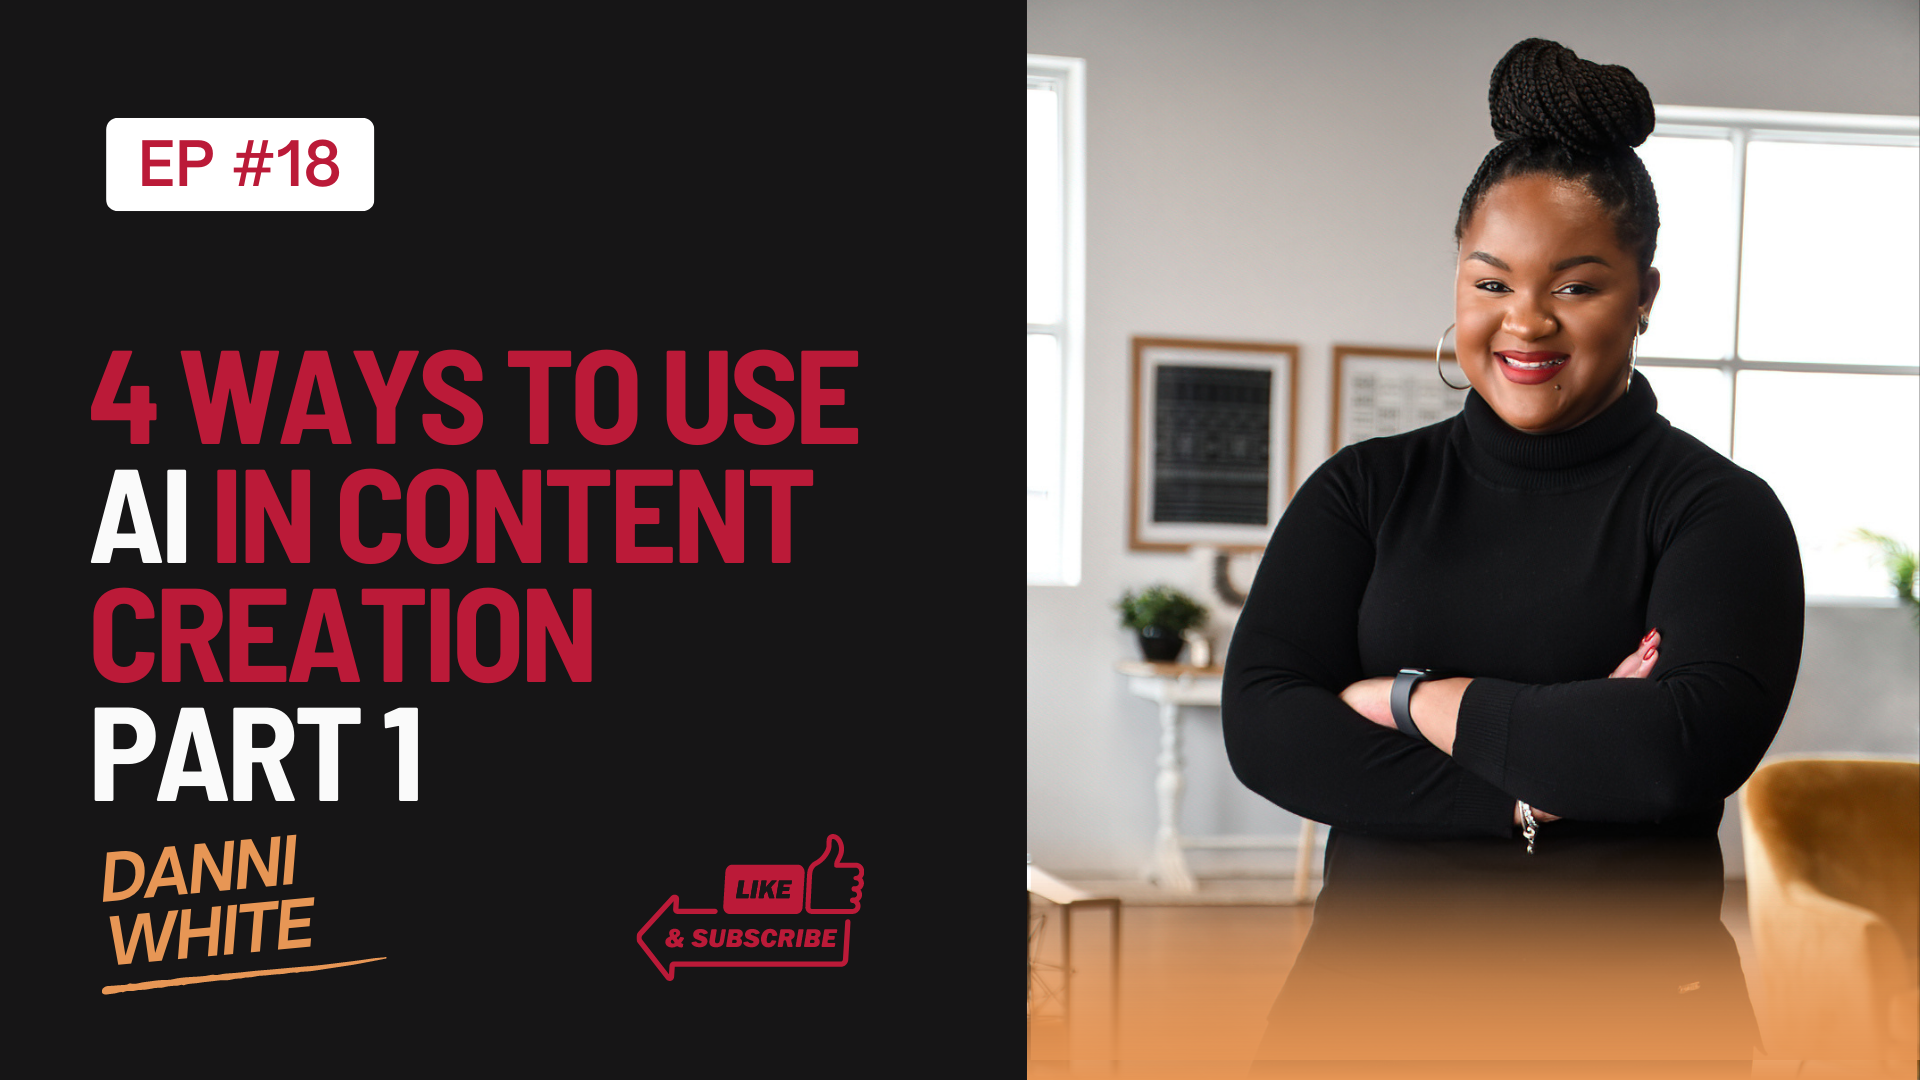 Episode 18: 4 Ways to Use AI in Content Creation [Part 1]